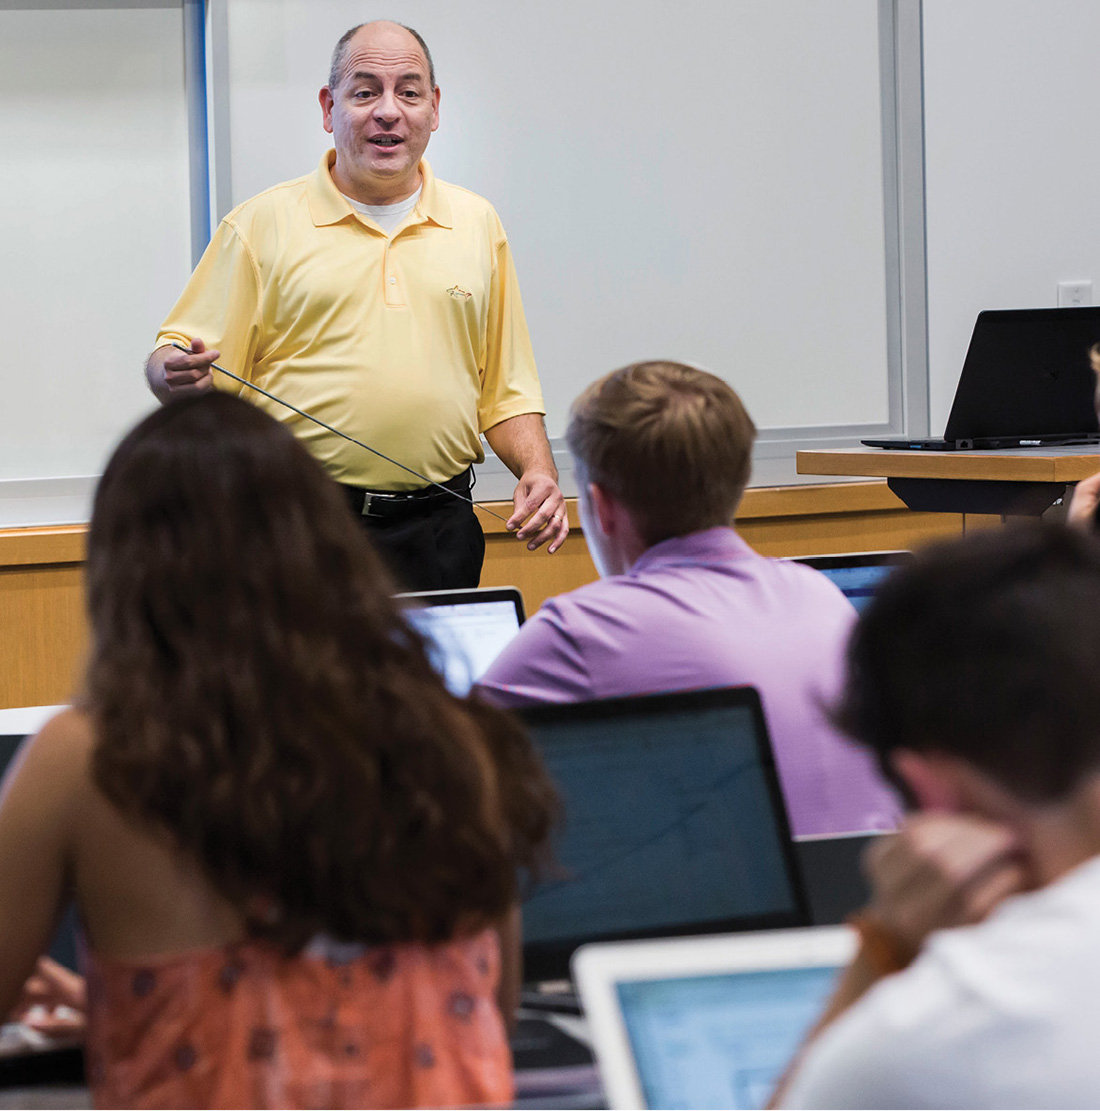 Michael Lapré, the E. Bronson Ingram Research Professor of Operations Management, teaches his Managing Operations course in the Owen Graduate School of Management. Lapré is among the faculty members teaching courses for Vanderbilt’s new business minor. (SUSAN URMY)